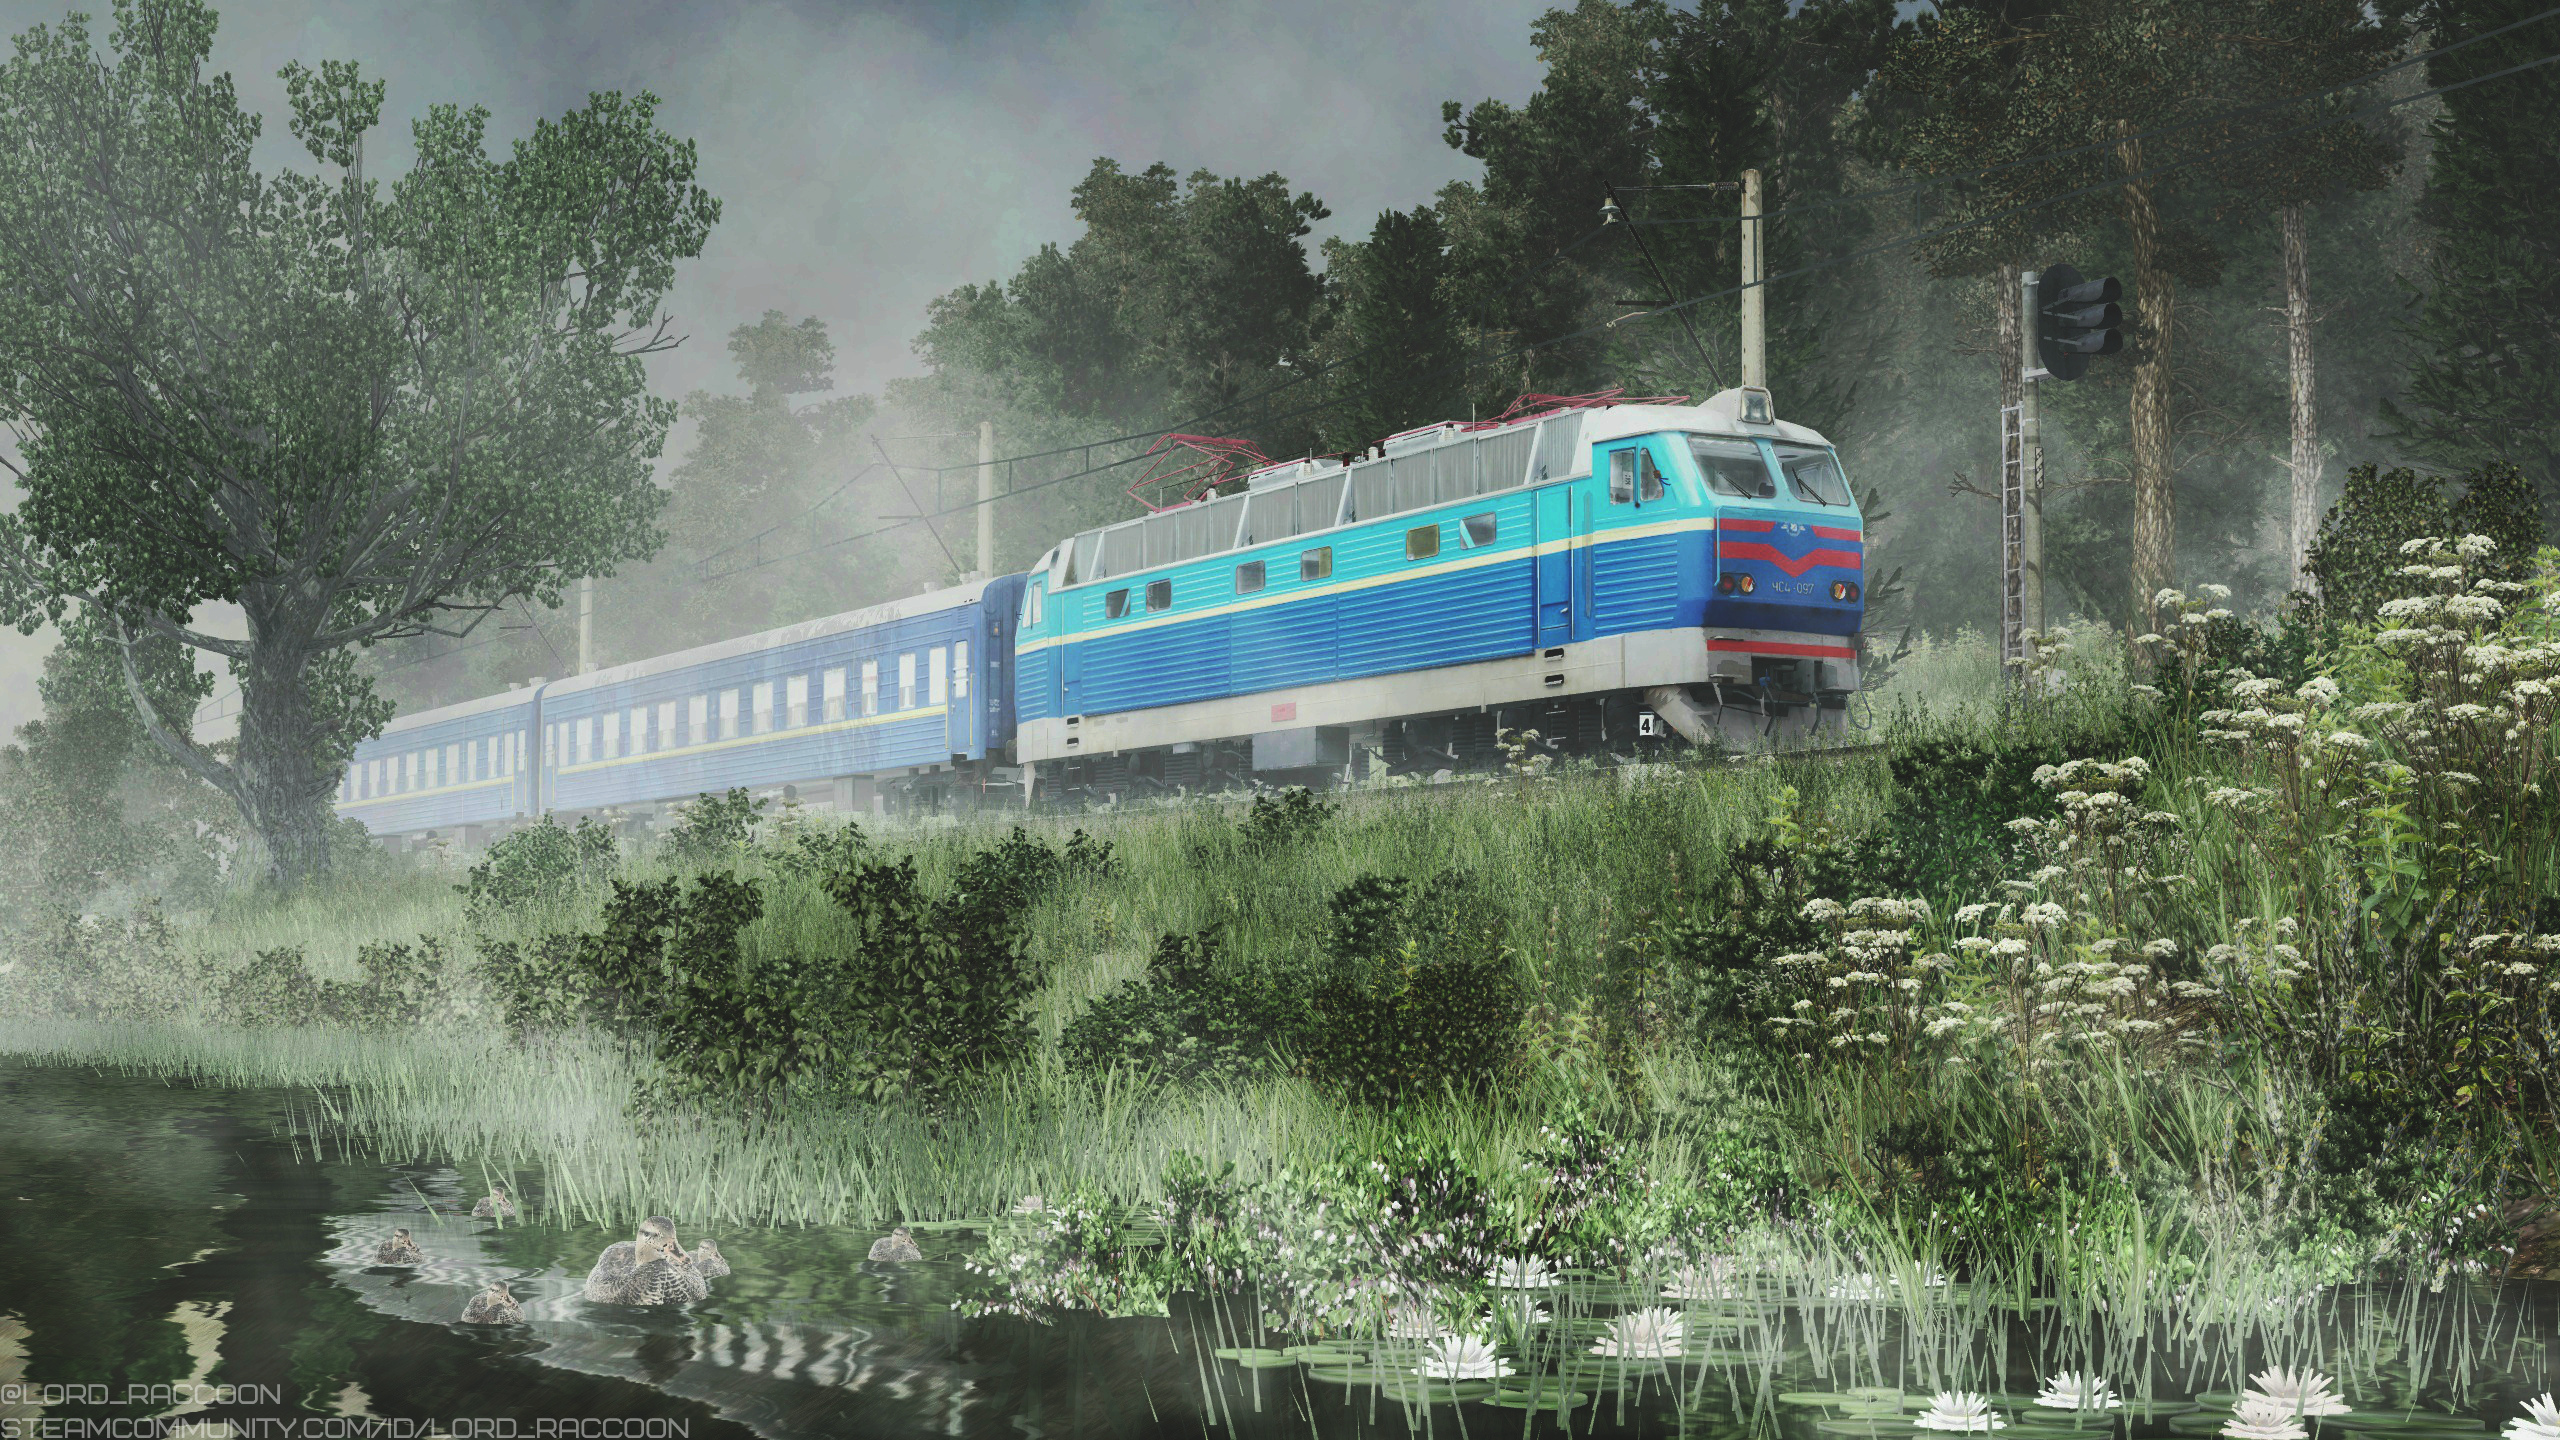 [TpF1] Mysterious atmosphere of the railway in sunset fog